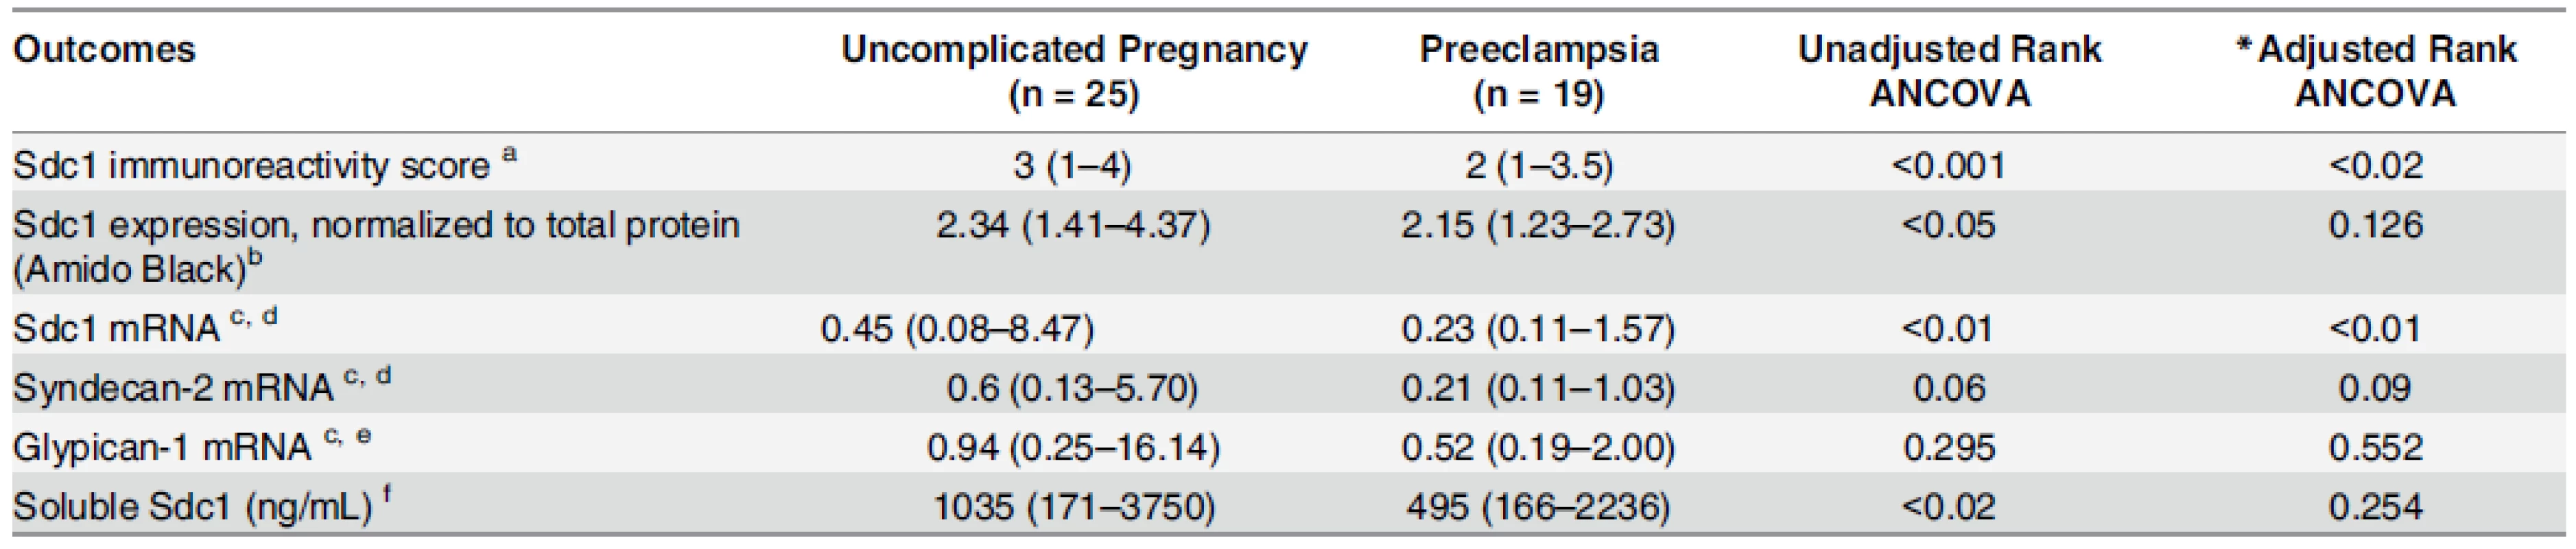 Placental and pre-delivery plasma data, corresponding to the uncomplicated pregnancy (n = 25) and preeclampsia (n = 19) groups described in Supplementary S4 Table.